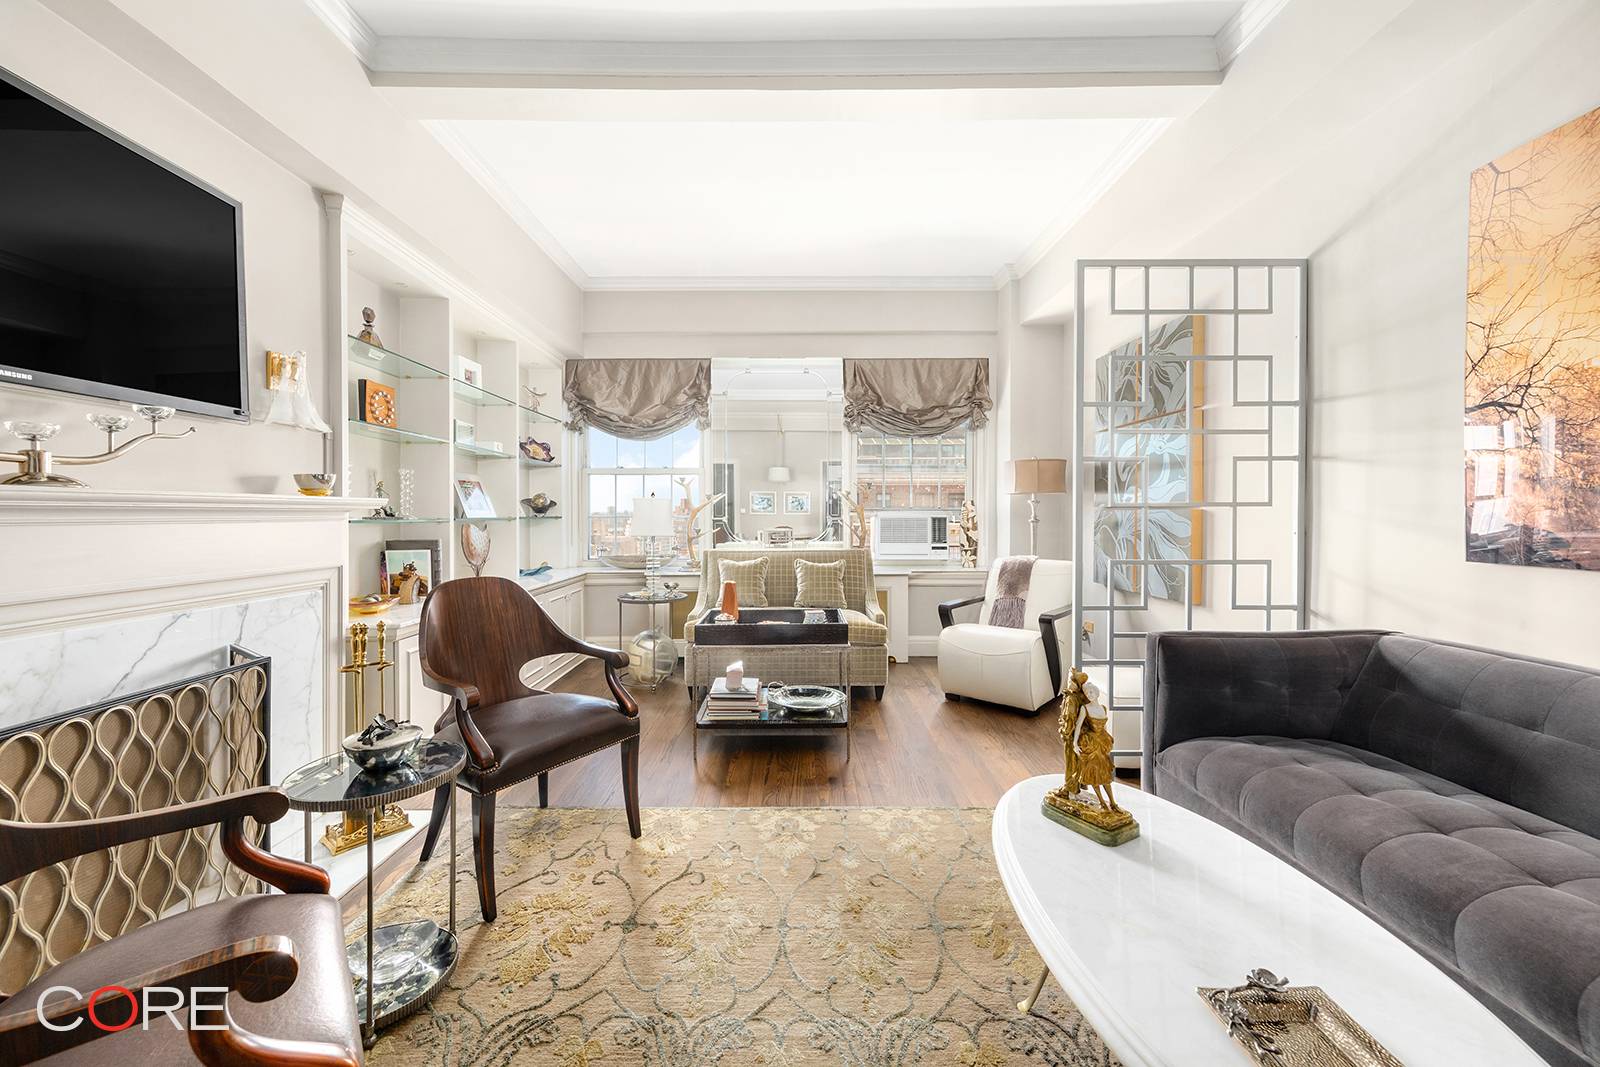 Nestled along historic Lower Fifth Avenue, this light filled, one bedroom home has been meticulously renovated, offering a seamless blend of pre war charm and modern finishes.